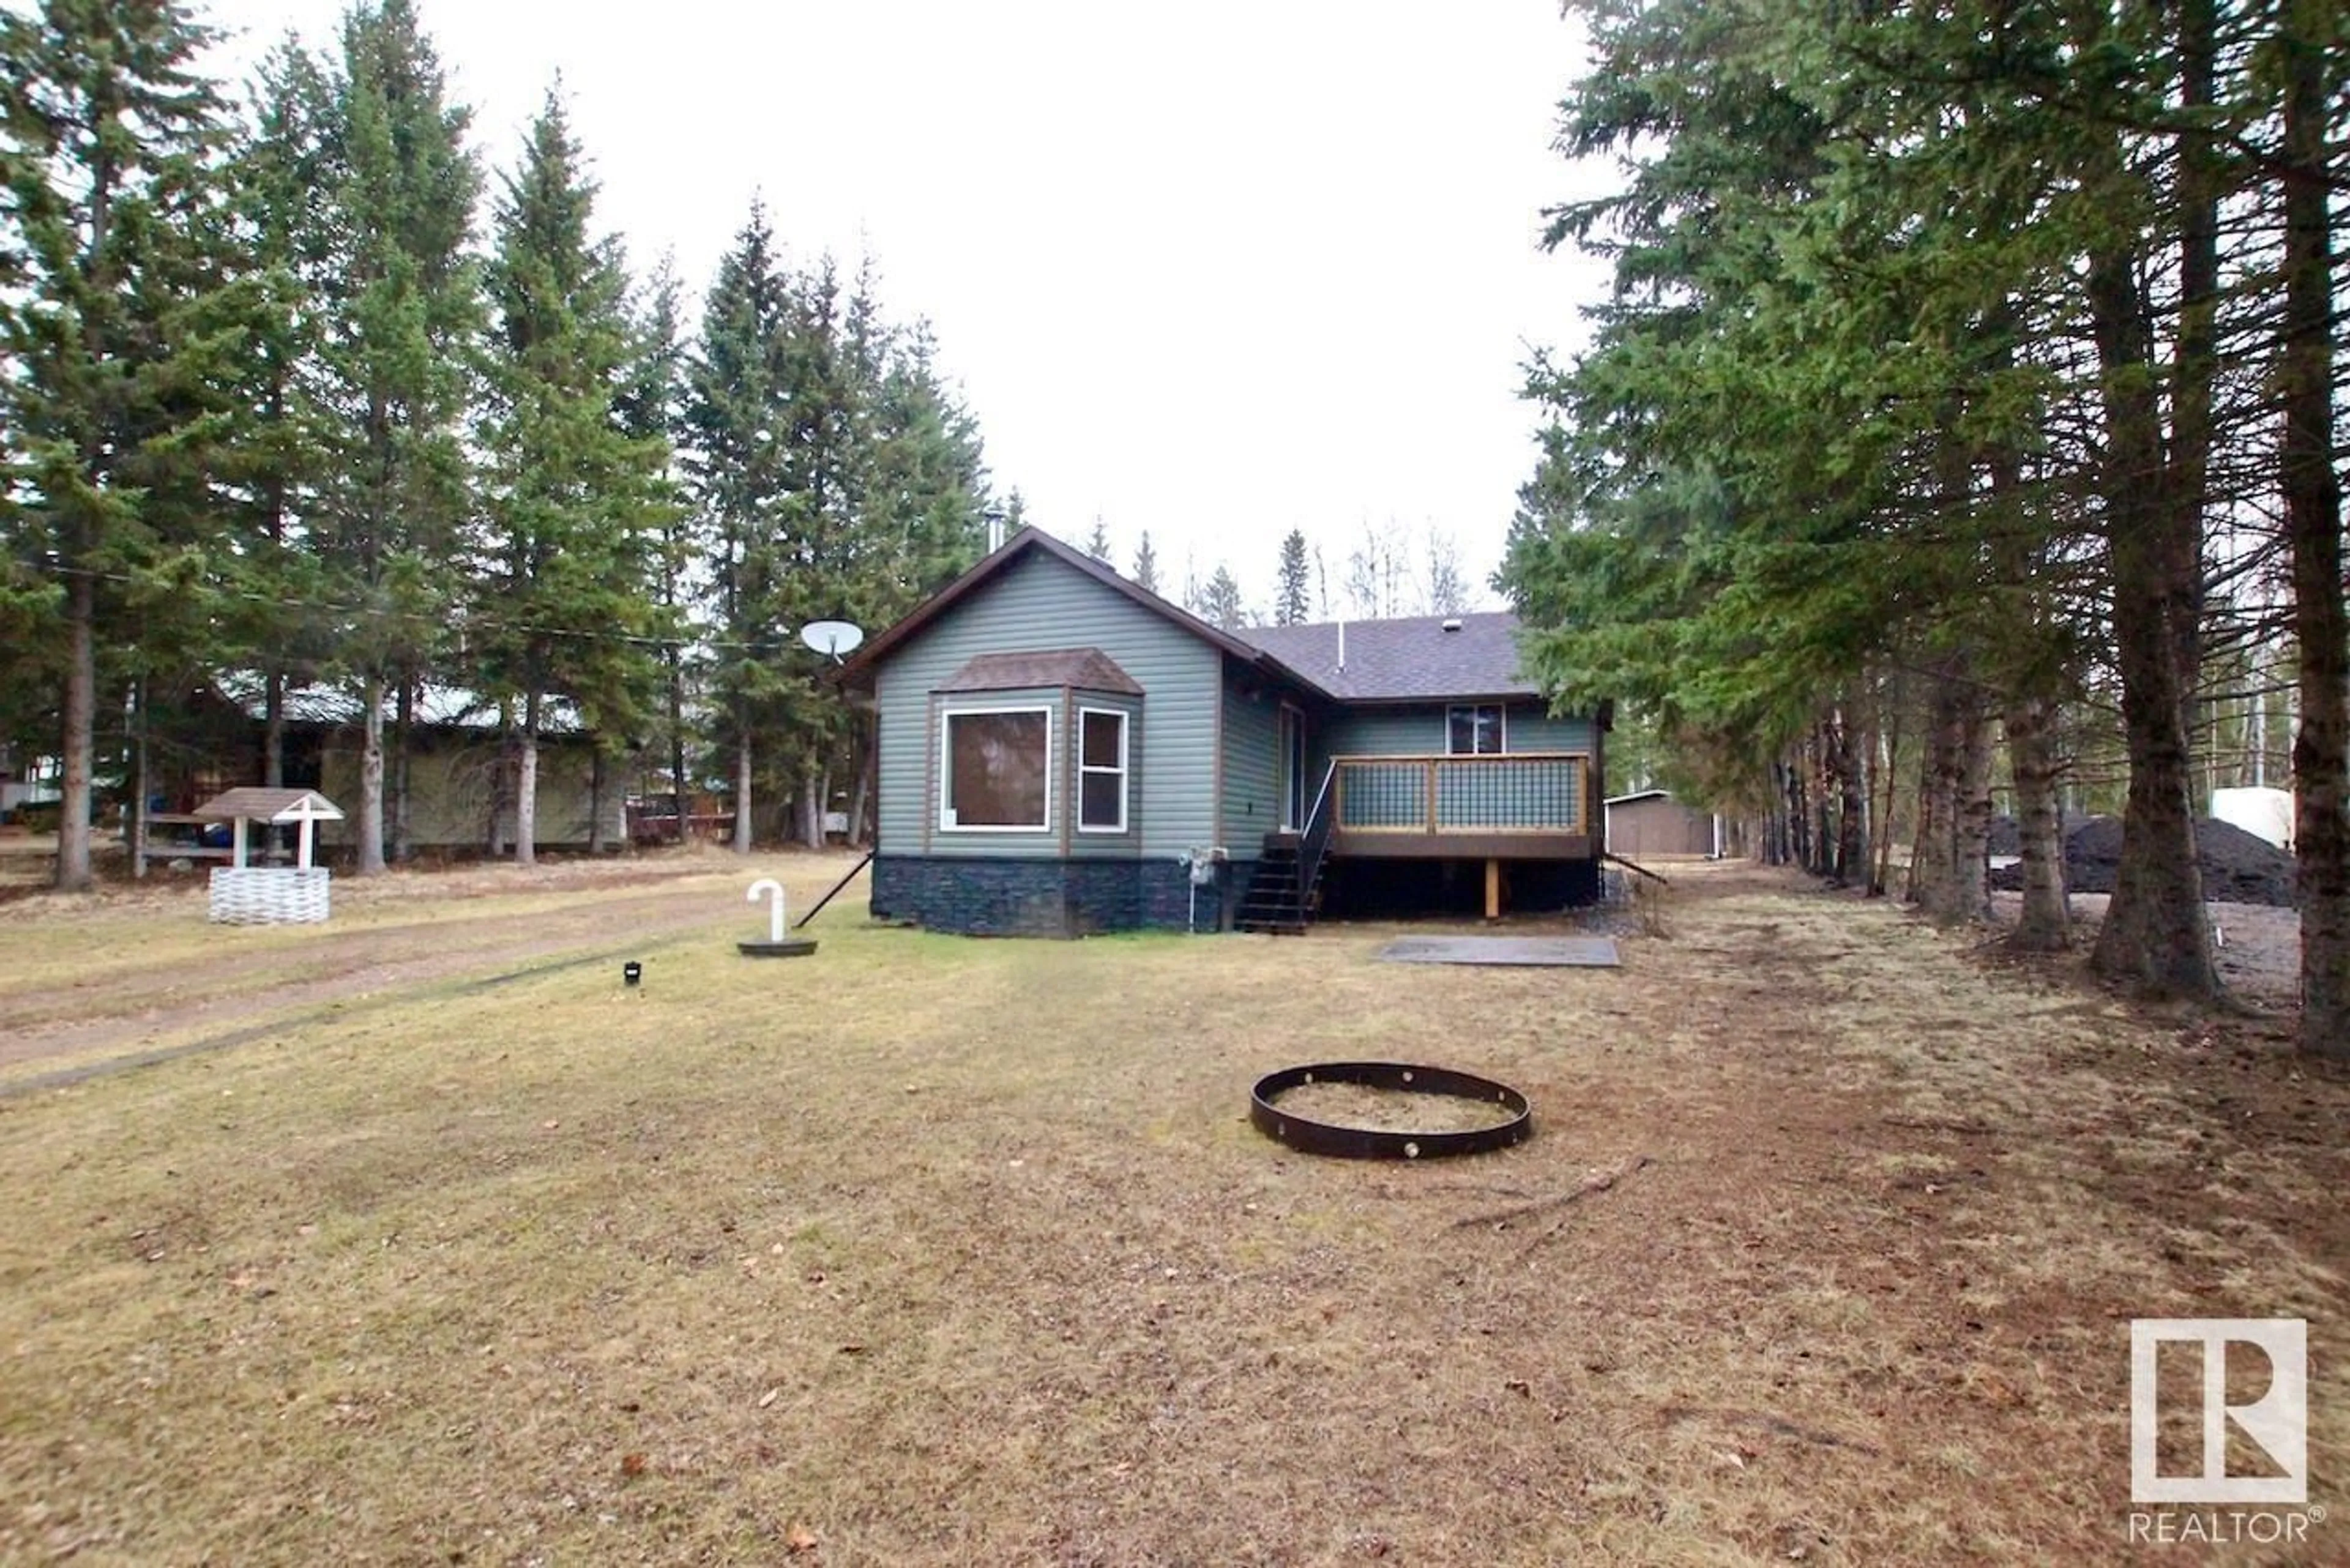 Cottage for 226A Lenard Road Pickerel Point SKELETON, Rural Athabasca County Alberta T0A0M0